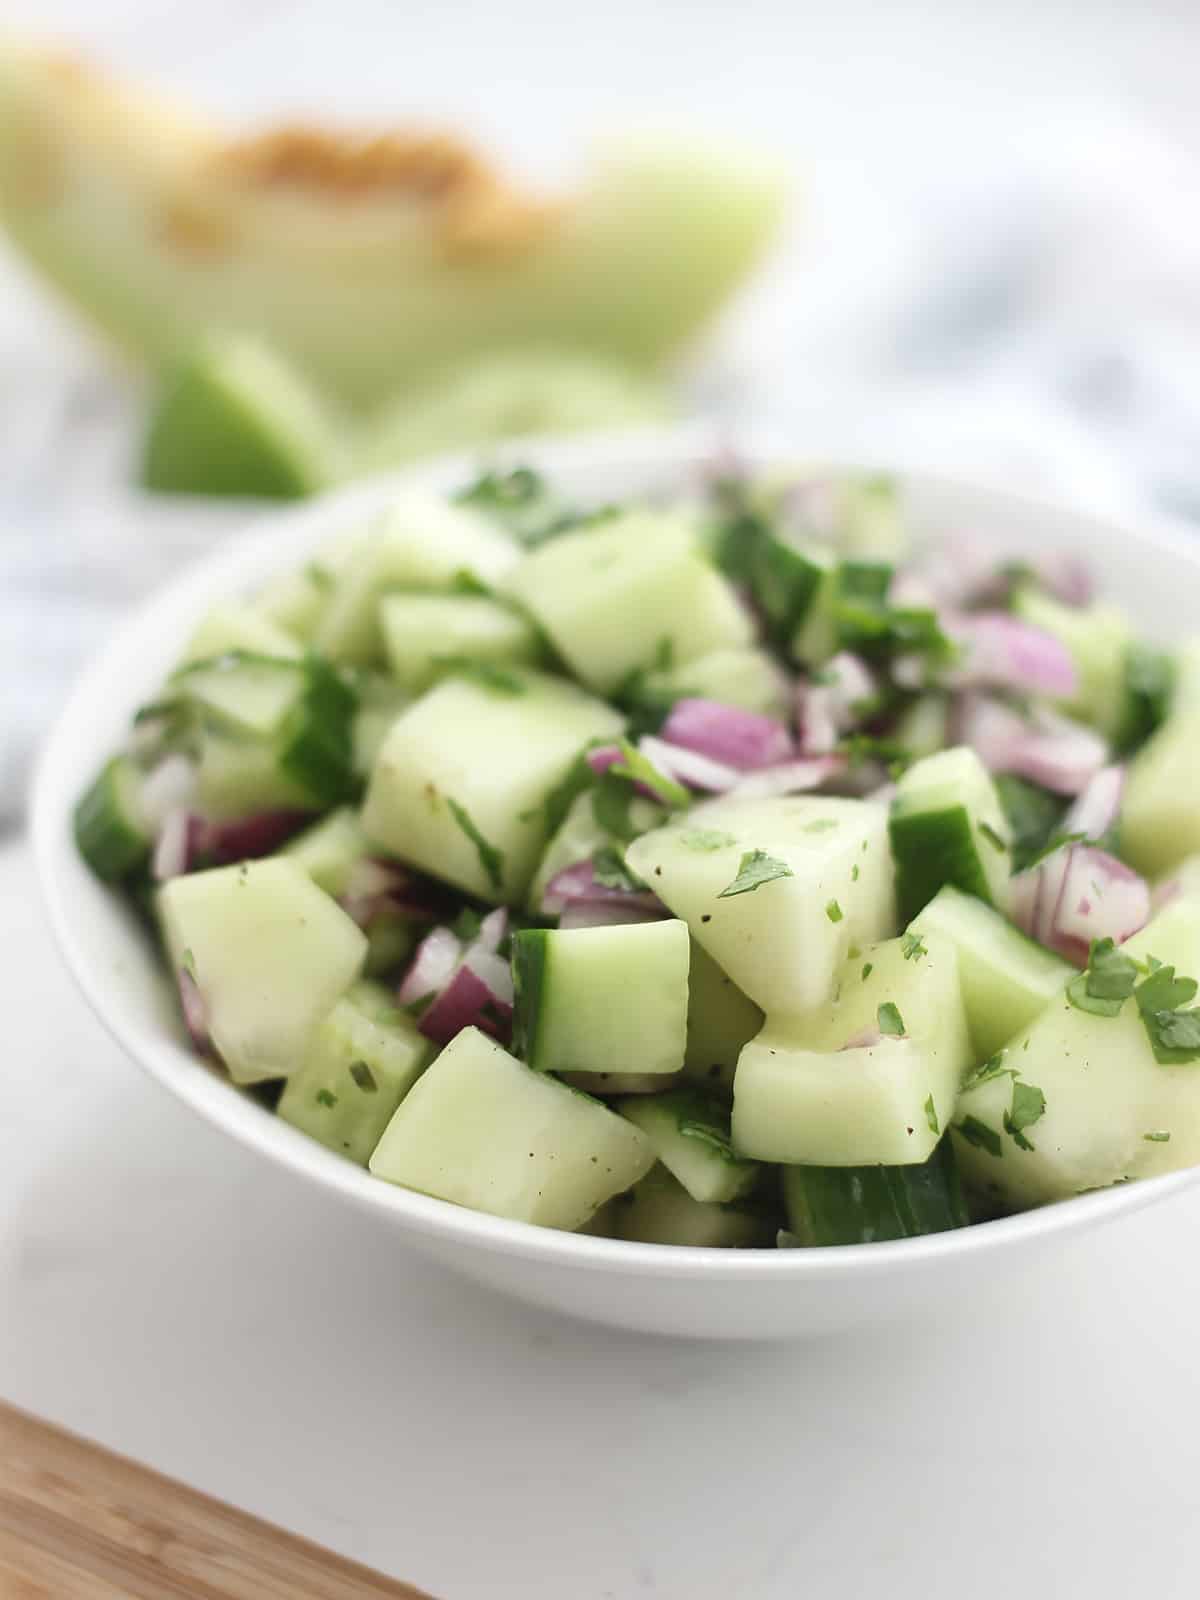 Cucumber red onion salad in a bowl in front of a slice of melon.